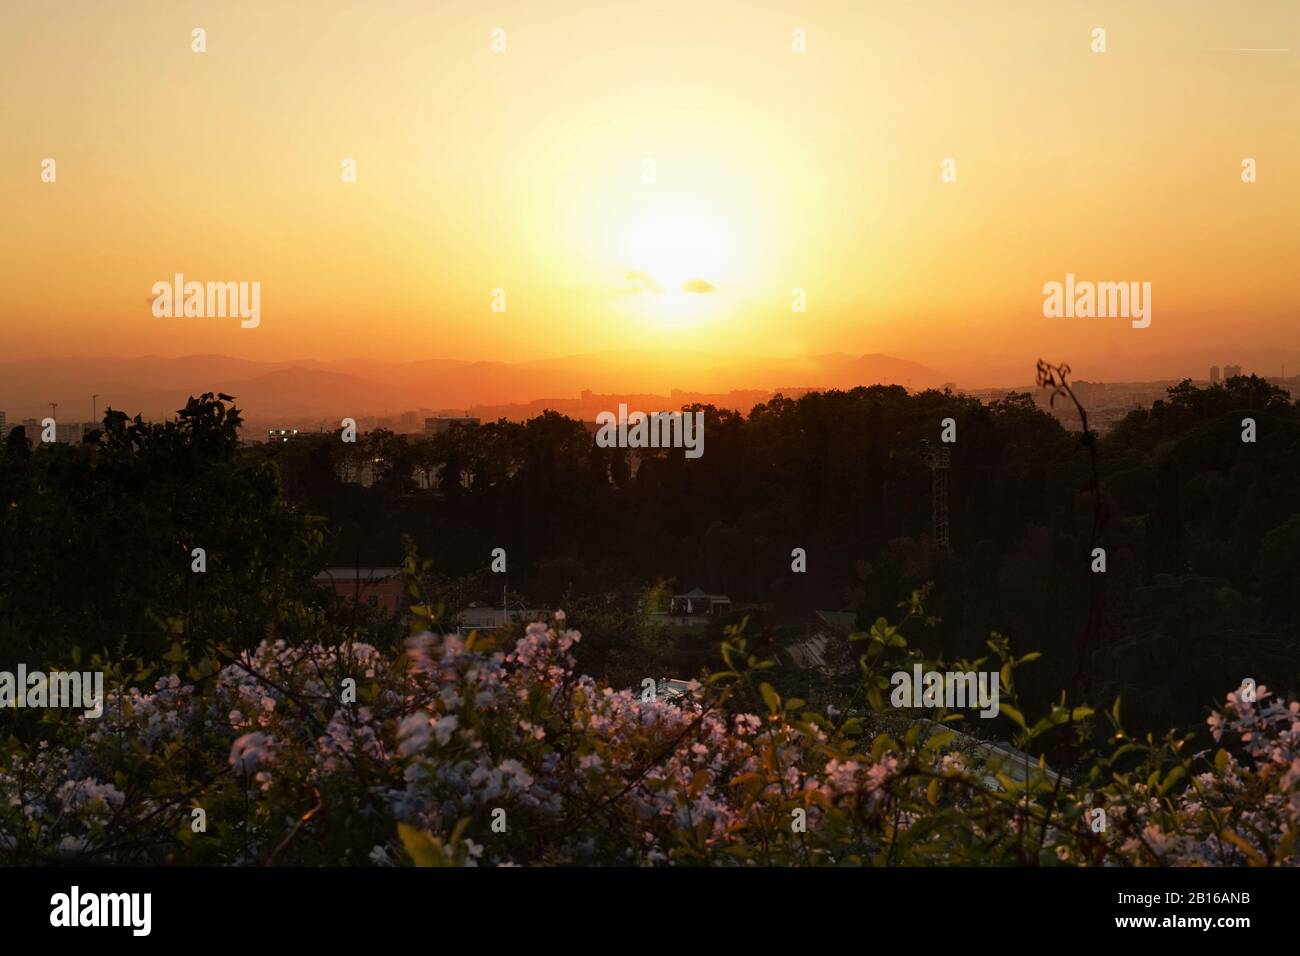 A hazy orange sunset hiding the hills in the distance with small violet flowers in the foreground Stock Photo